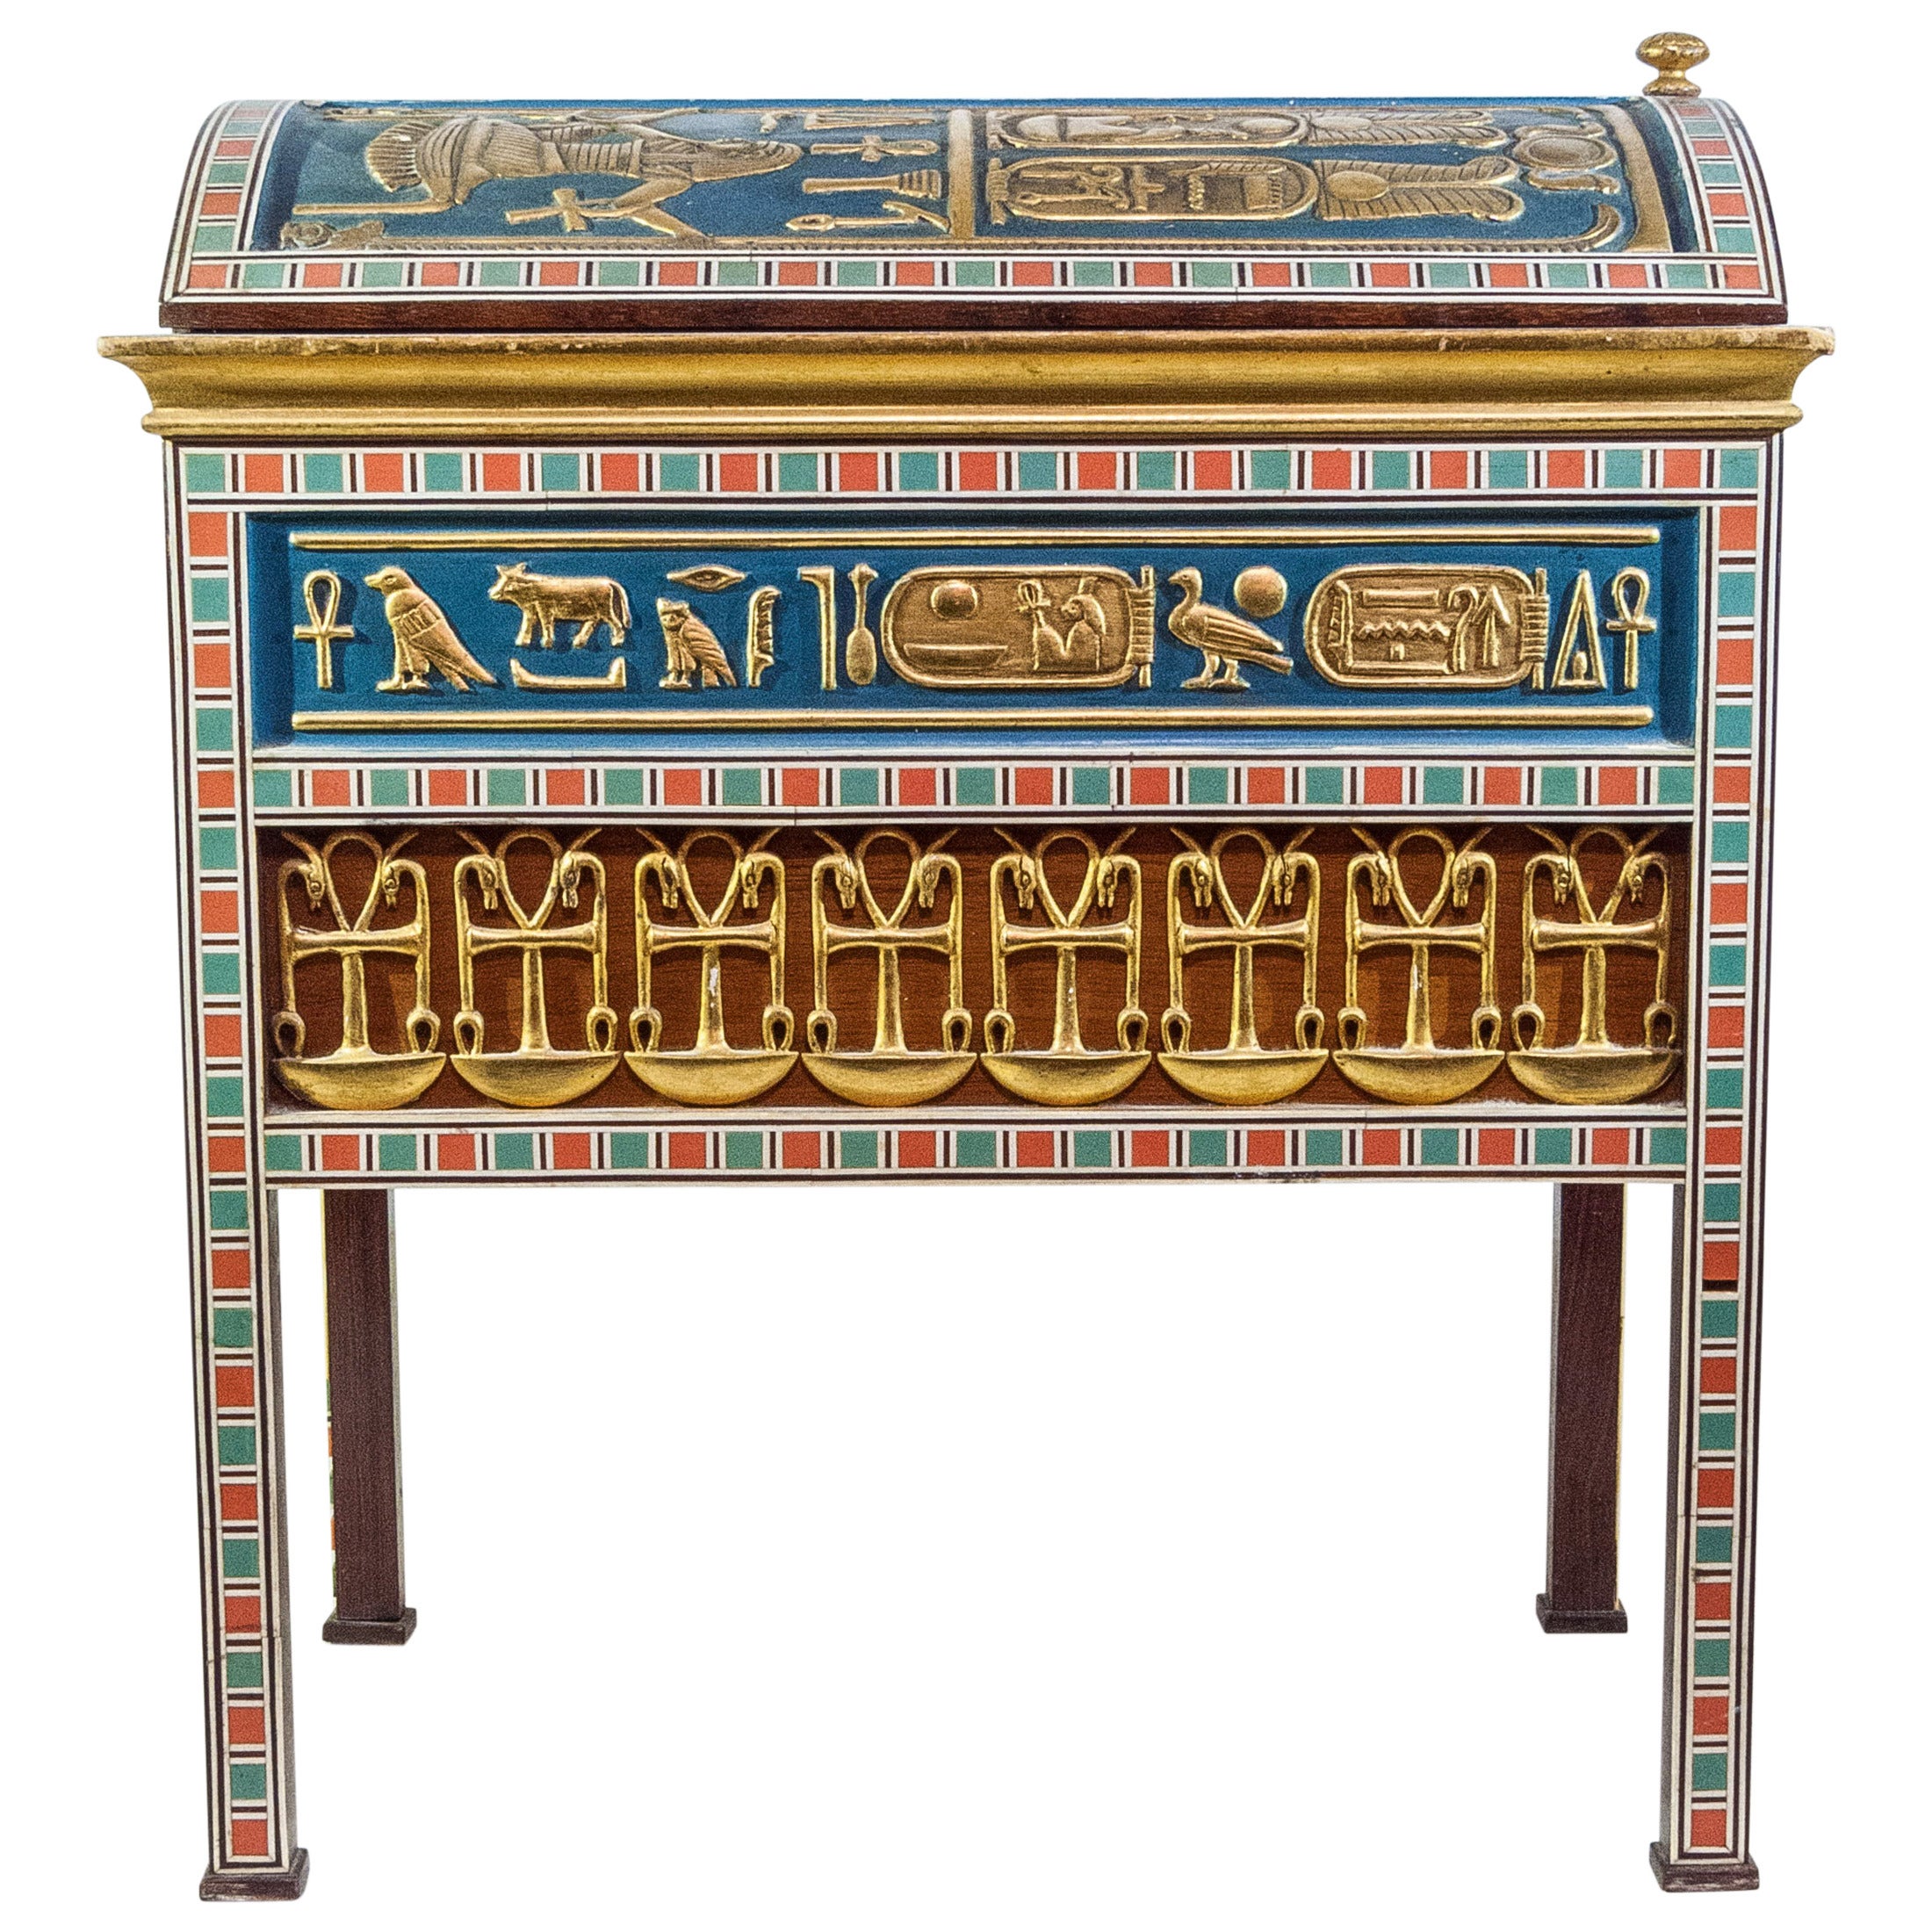 Egyptian Revival Footed Jewelry Box Humidor